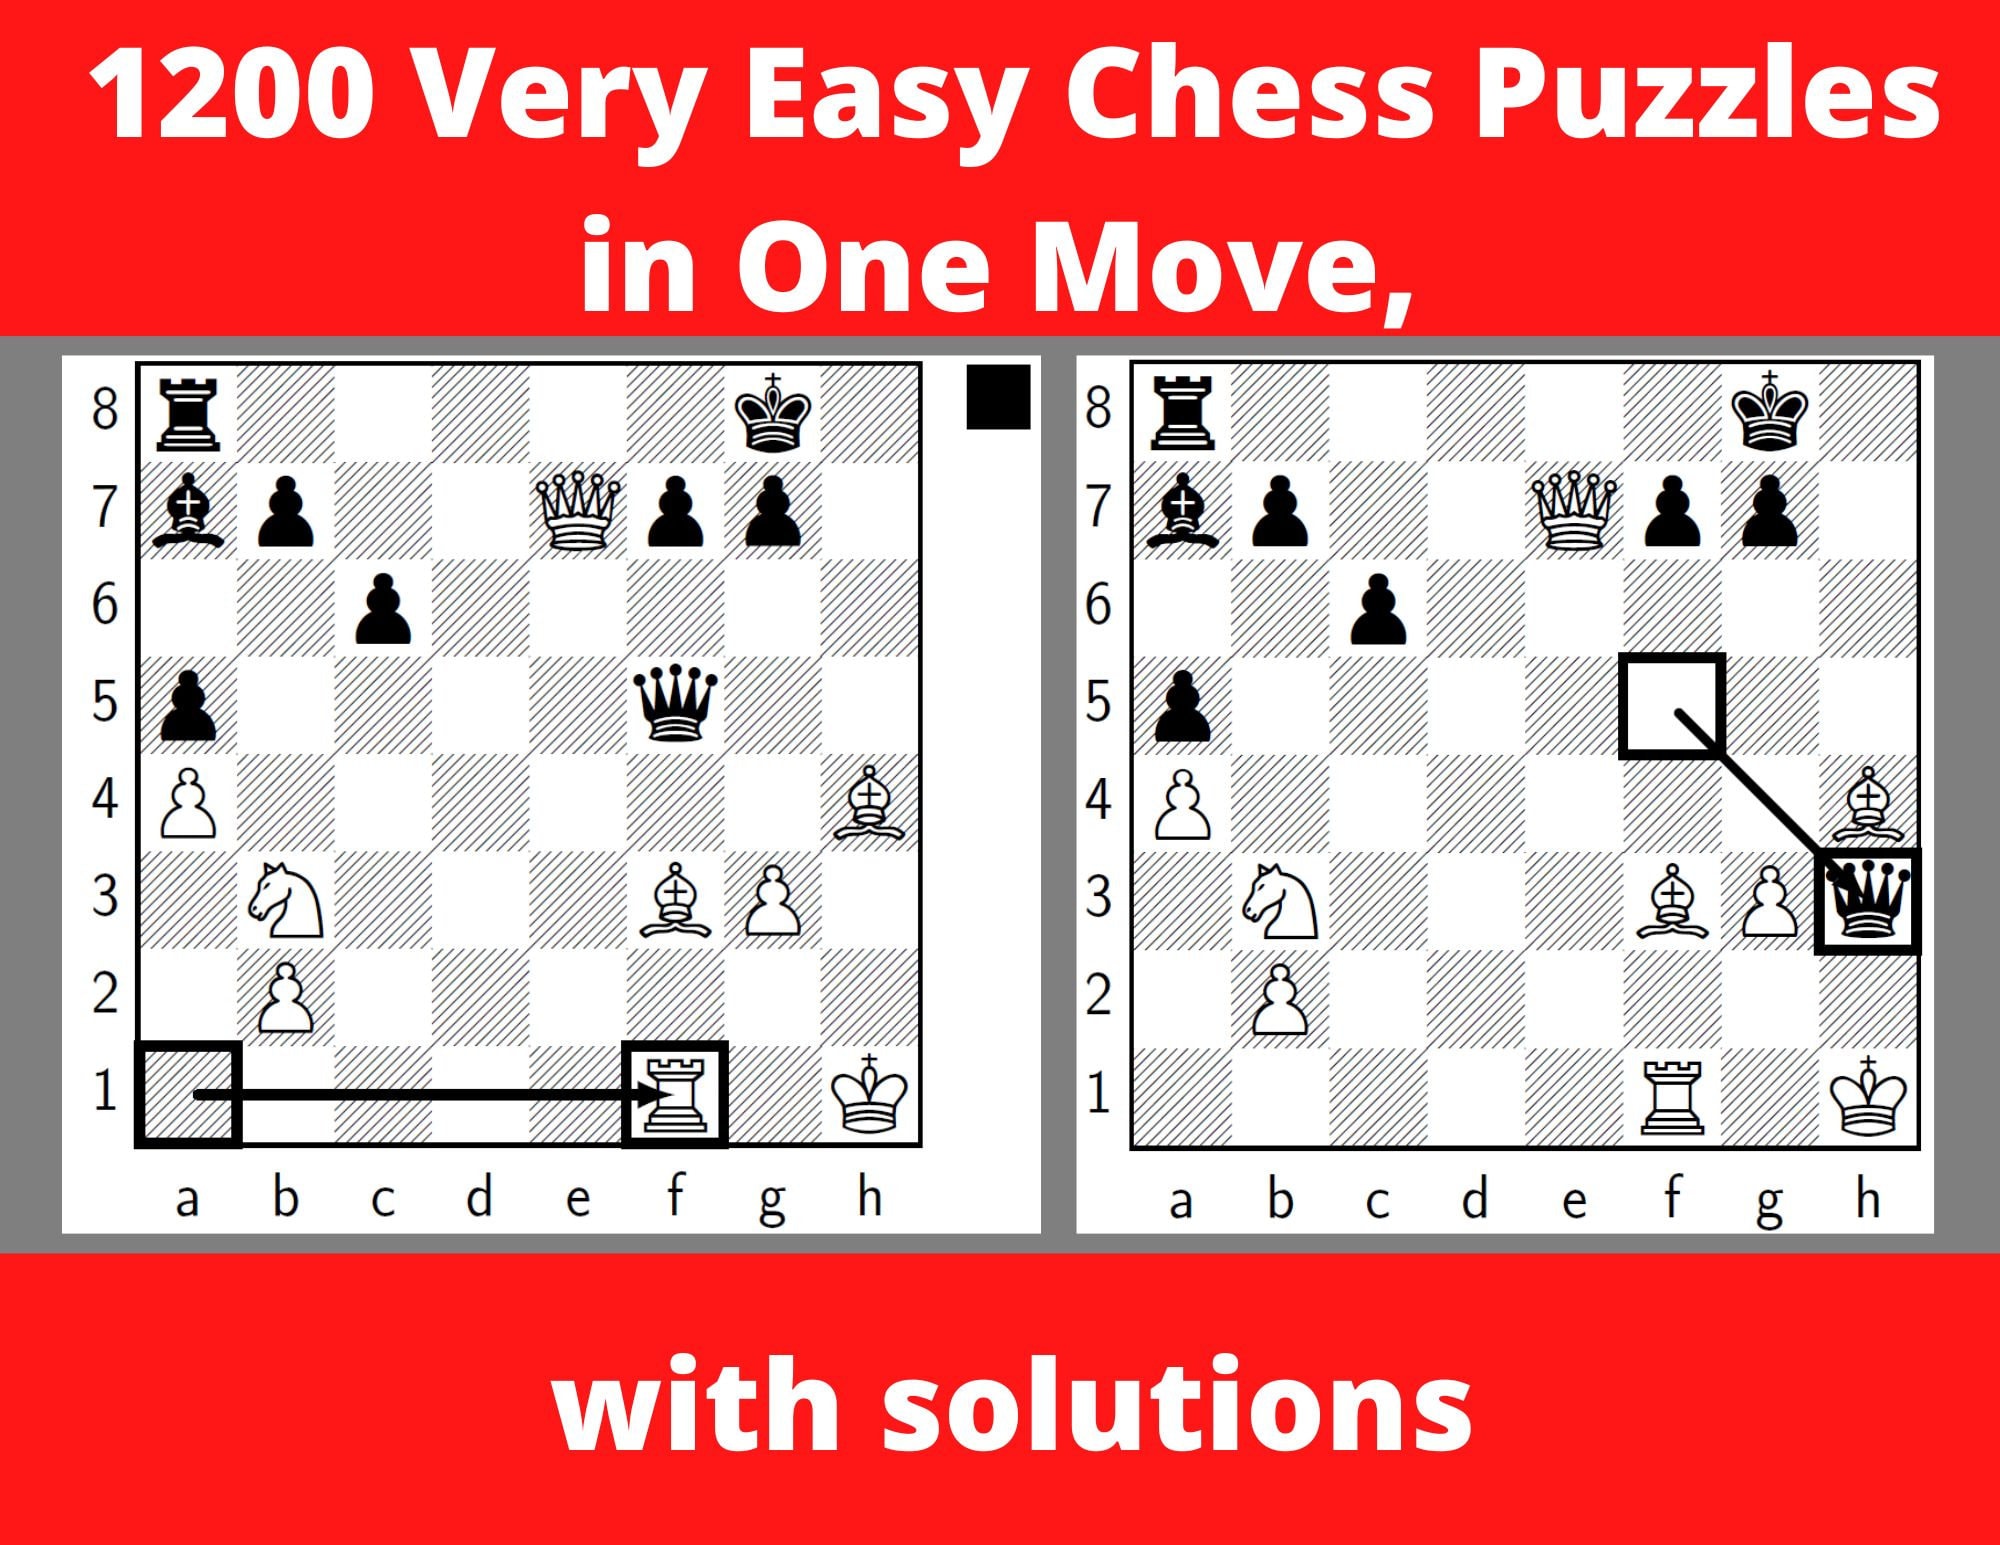 101 Questions on How to Play Chess (Dover Chess)